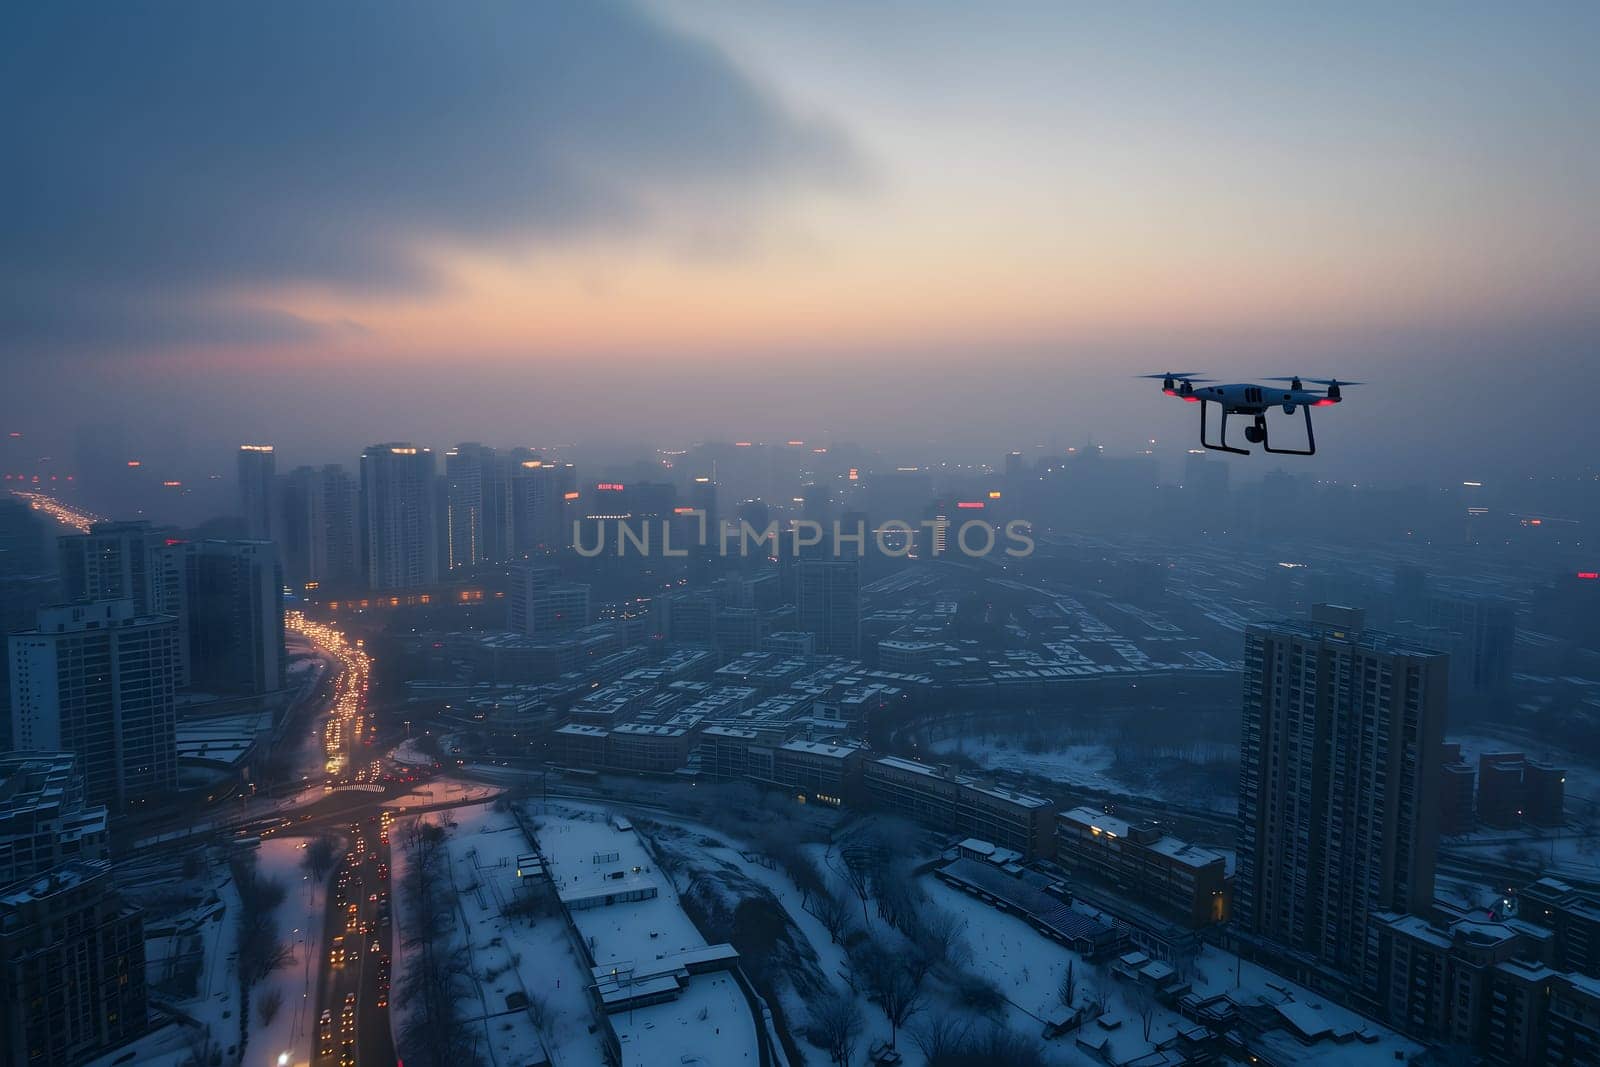 Flying drone above the city at misty winter morning. Neural network generated image. Not based on any actual scene or pattern.